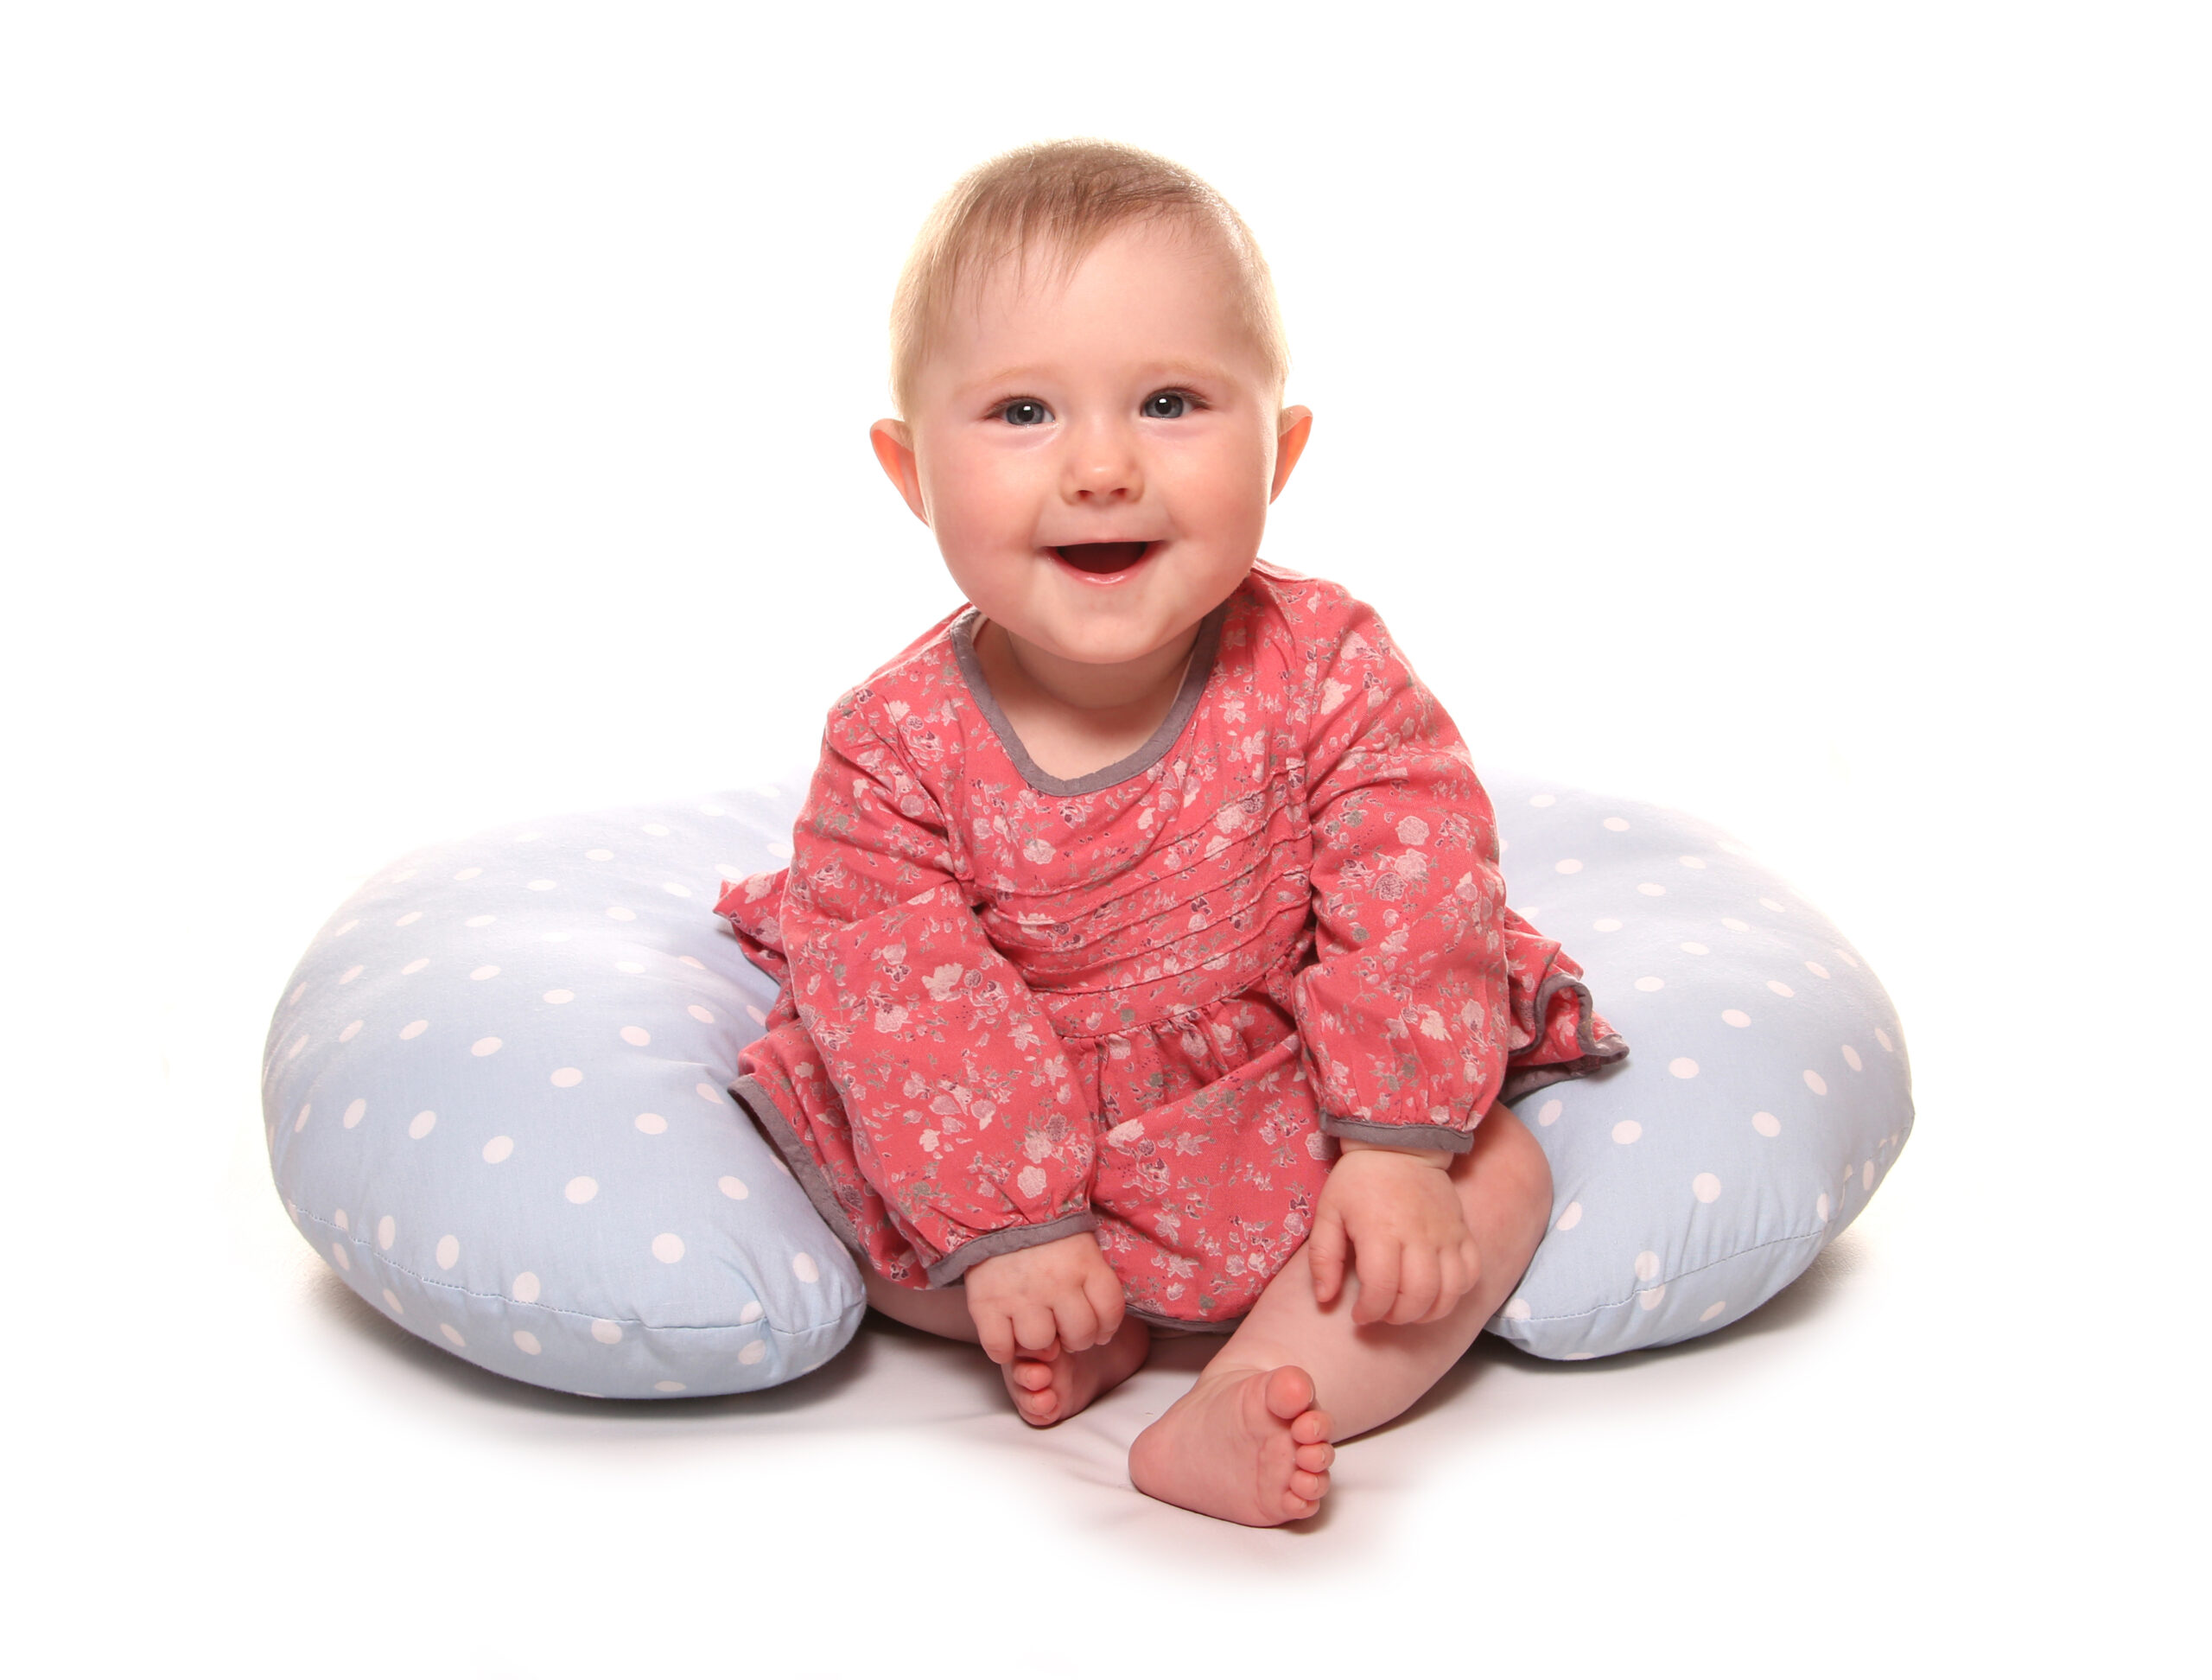 When Can My Toddler Sleep With a Pillow?